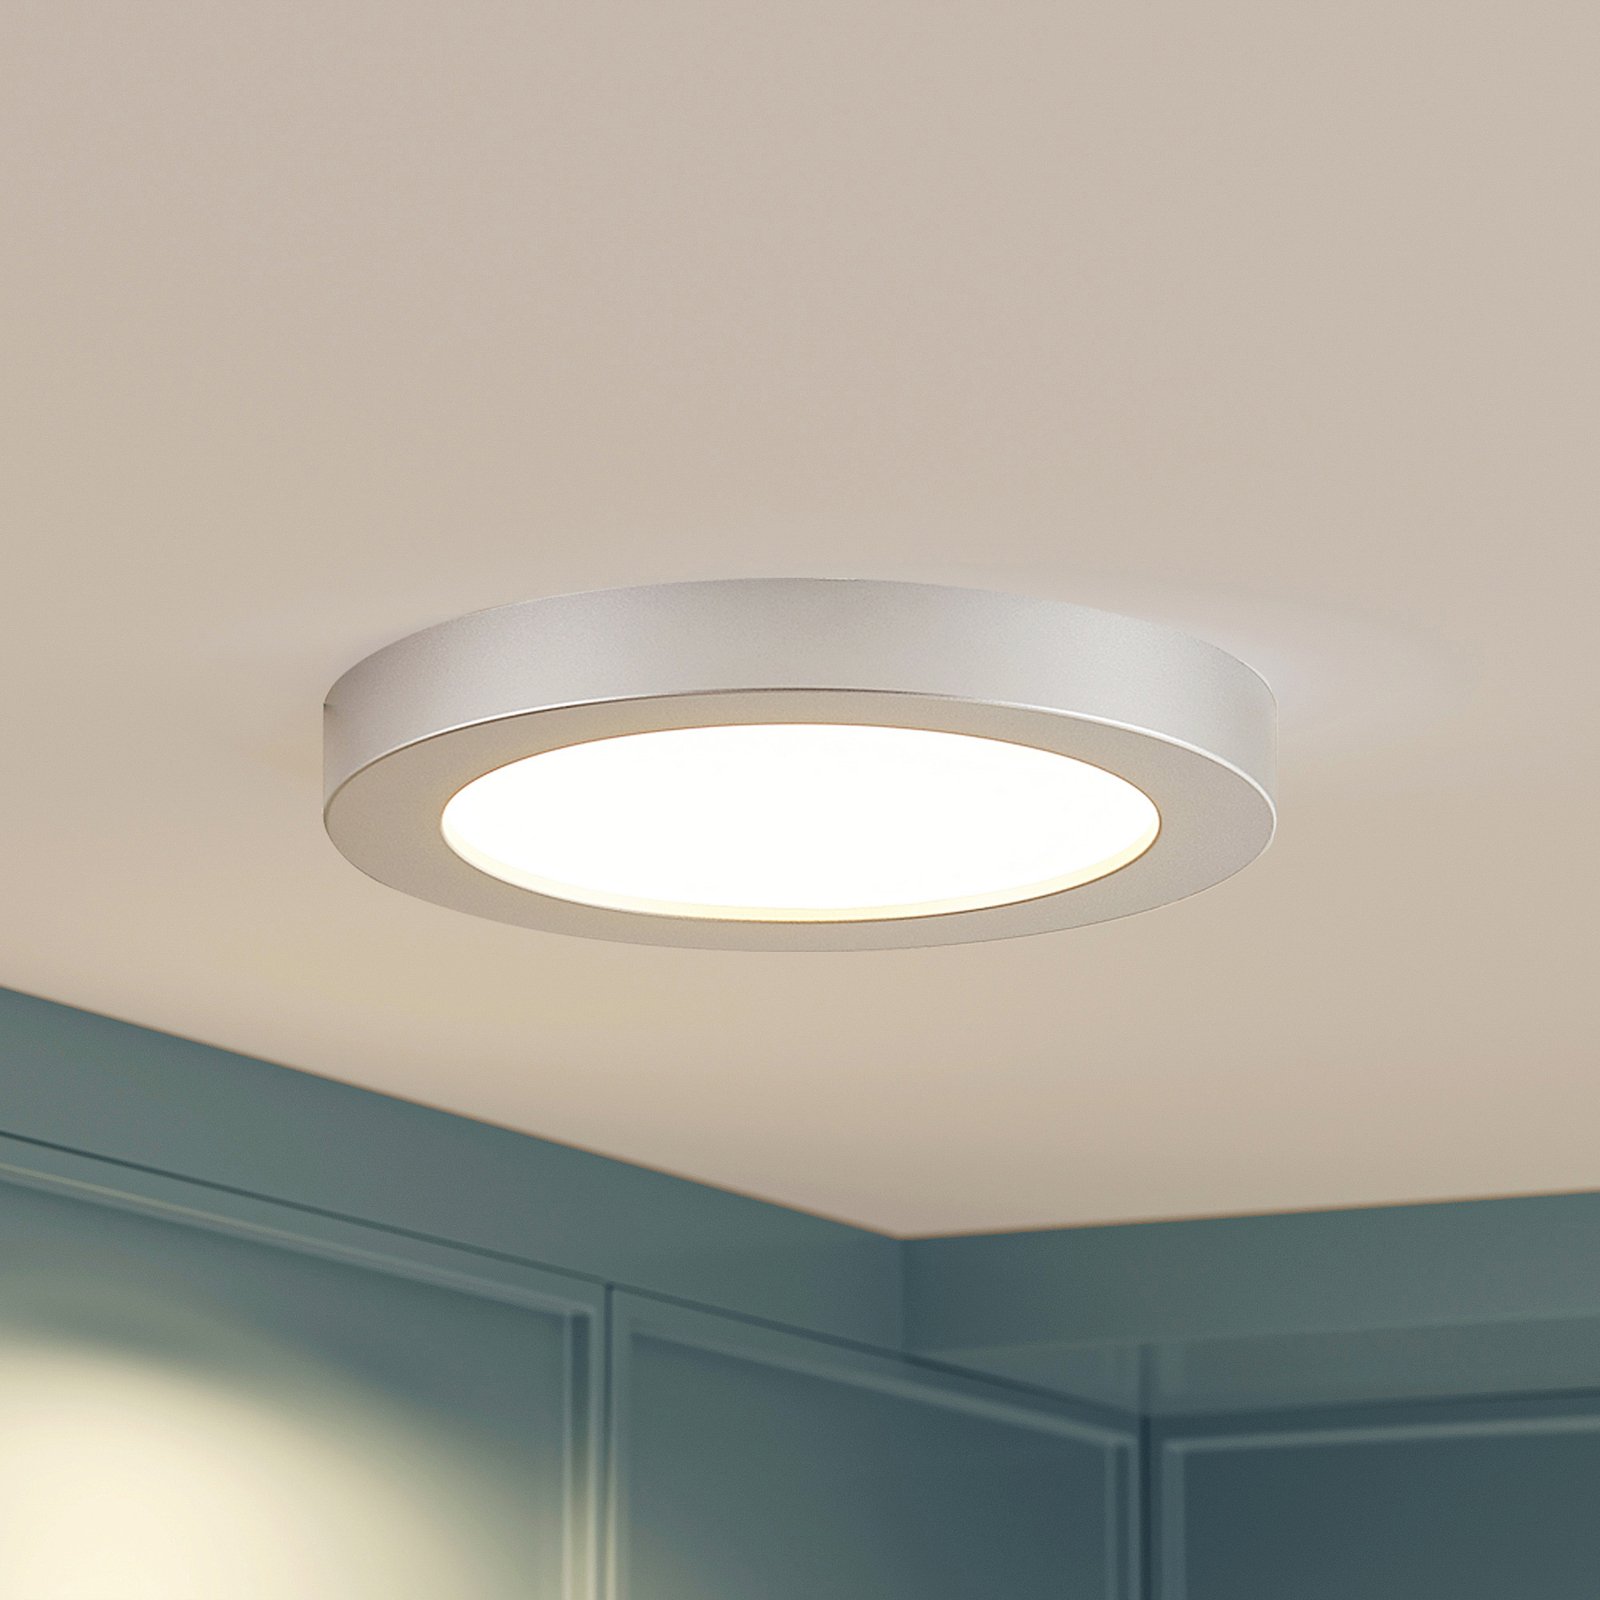 Prios LED ceiling light Edwina, silver, 22.6 cm, dimmable